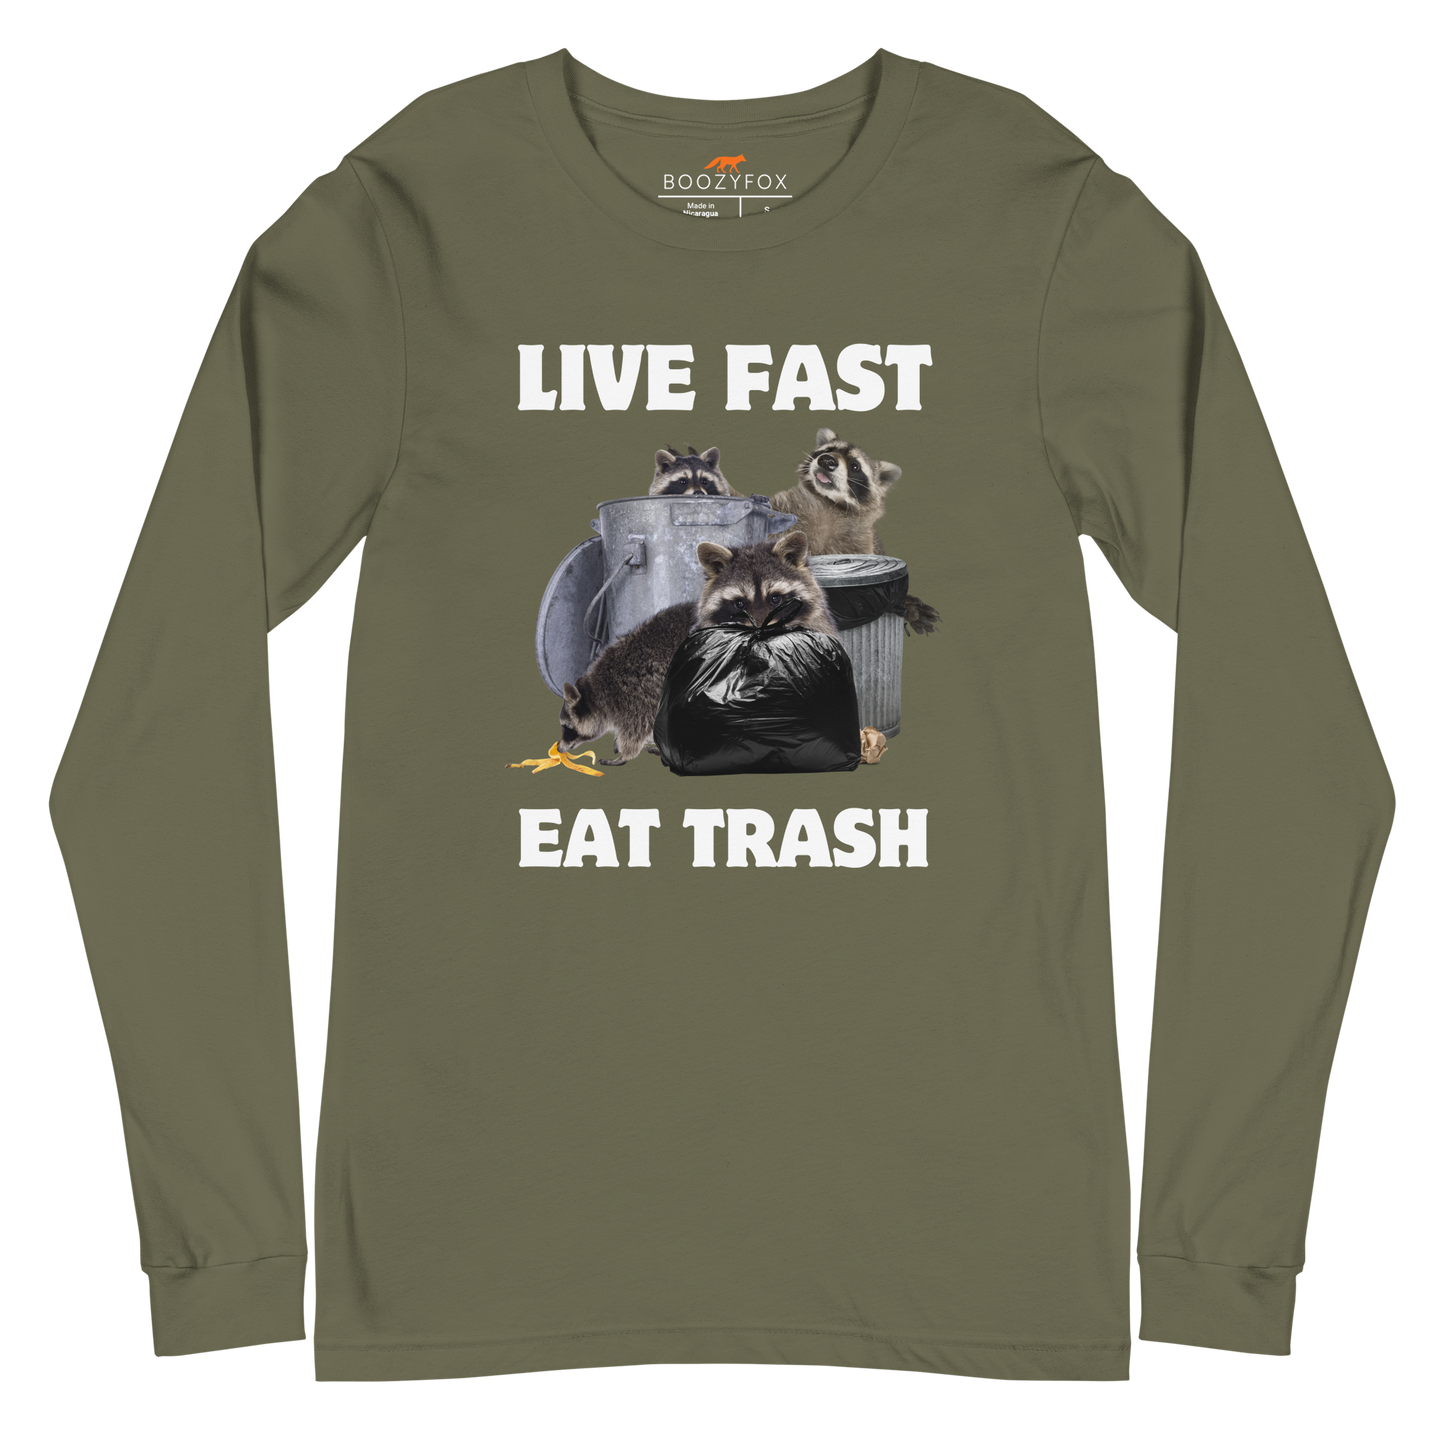 Military Green Raccoon Long Sleeve Tee featuring a funny Live Fast Eat Trash graphic on the chest - Funny Raccoon Long Sleeve Graphic Tees - Boozy Fox